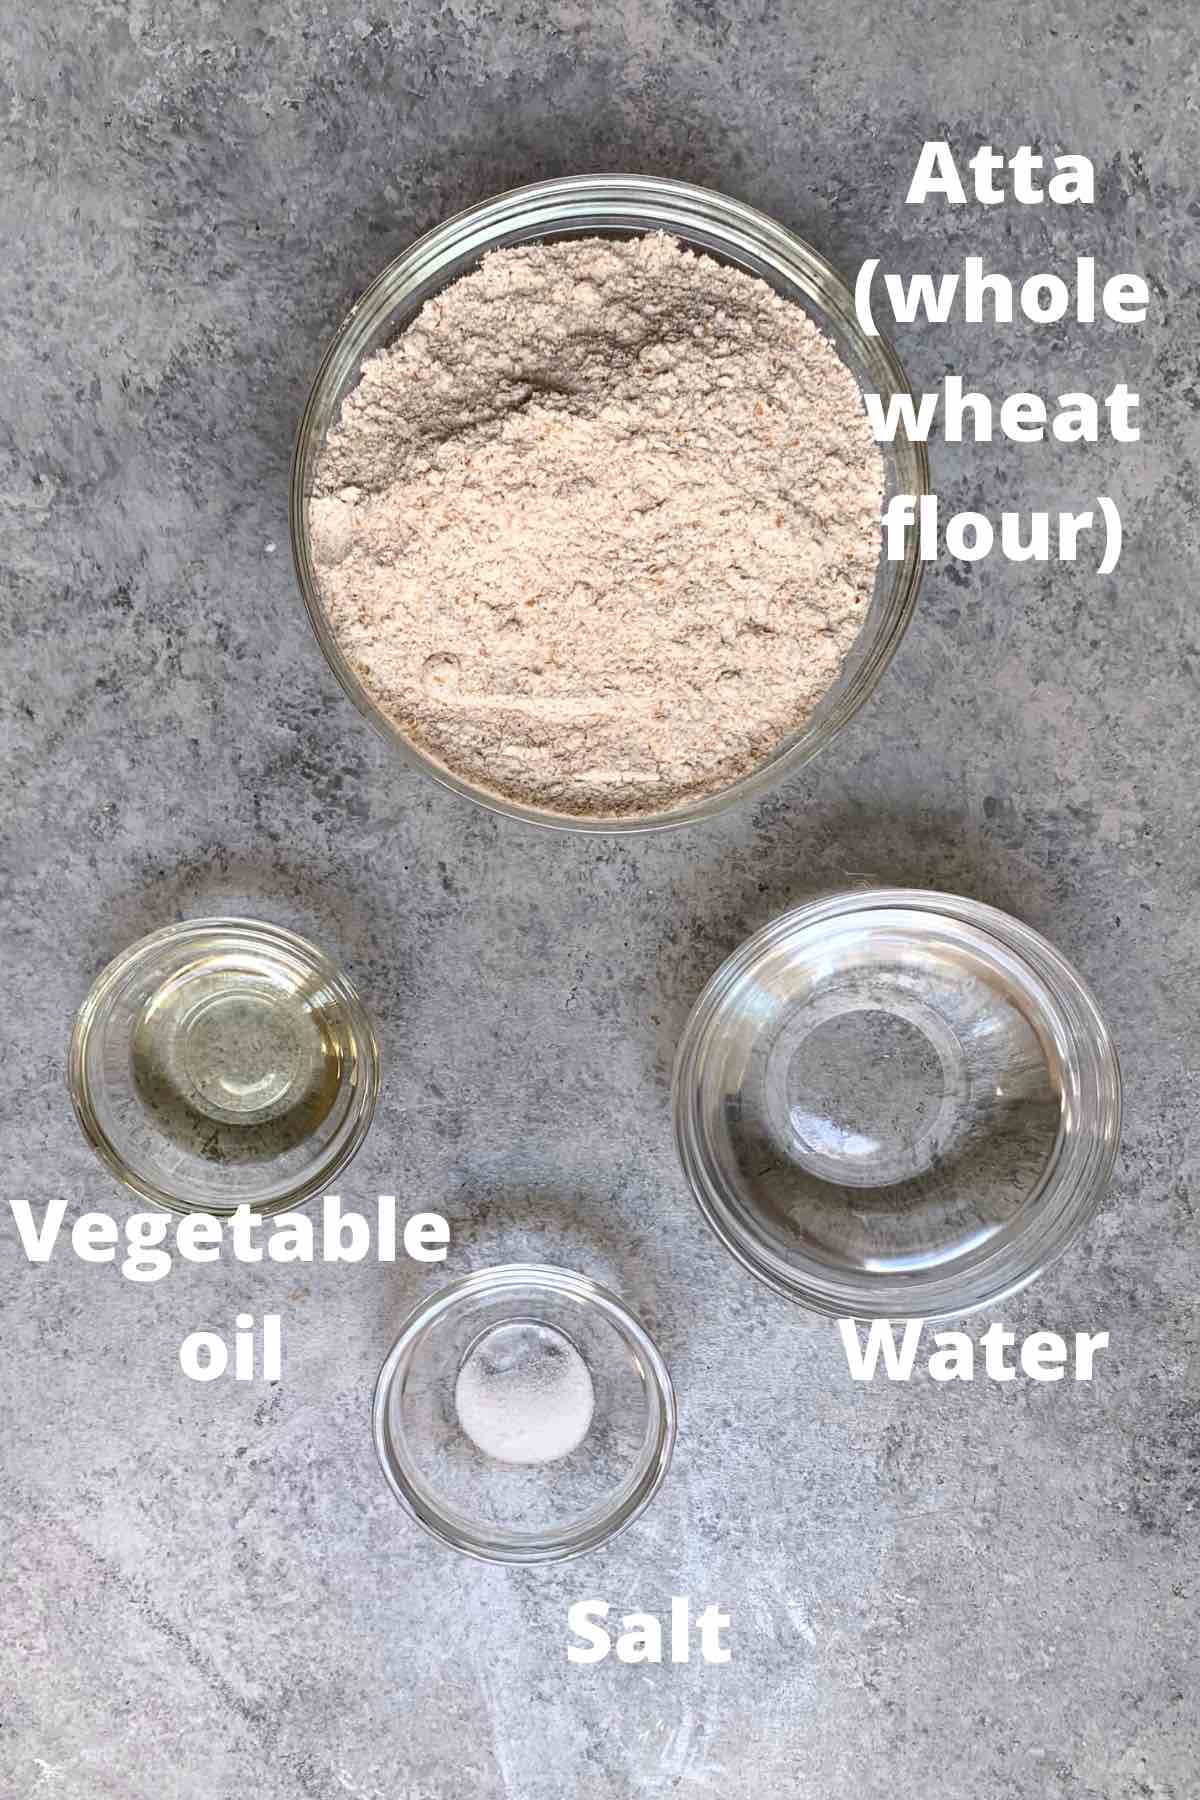 Ingredients for making roti: atta flour, salt, vegetable oil and water